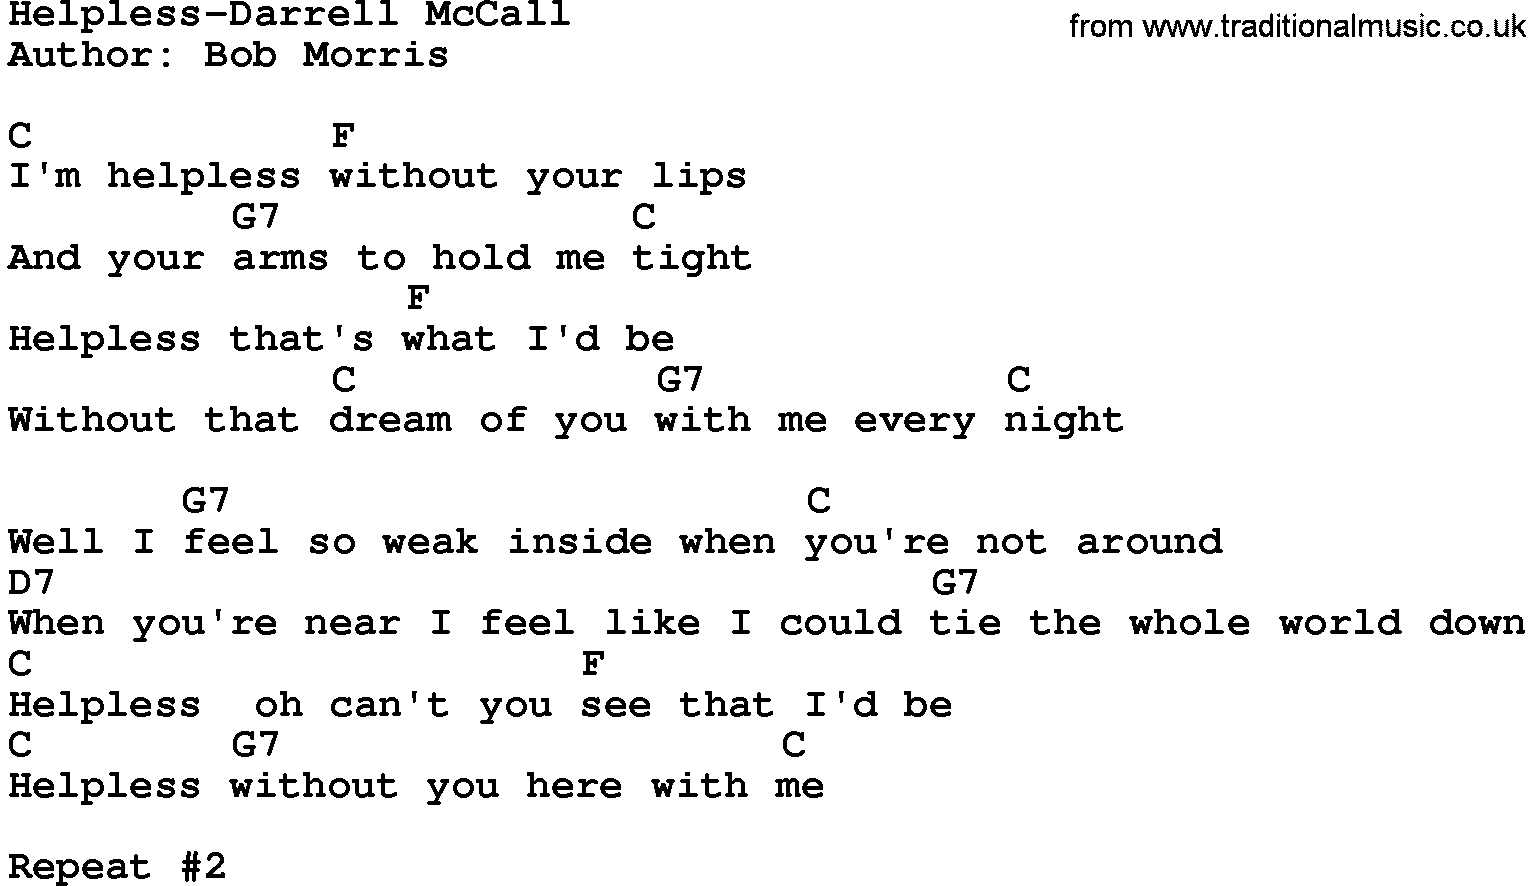 Country music song: Helpless-Darrell Mccall lyrics and chords